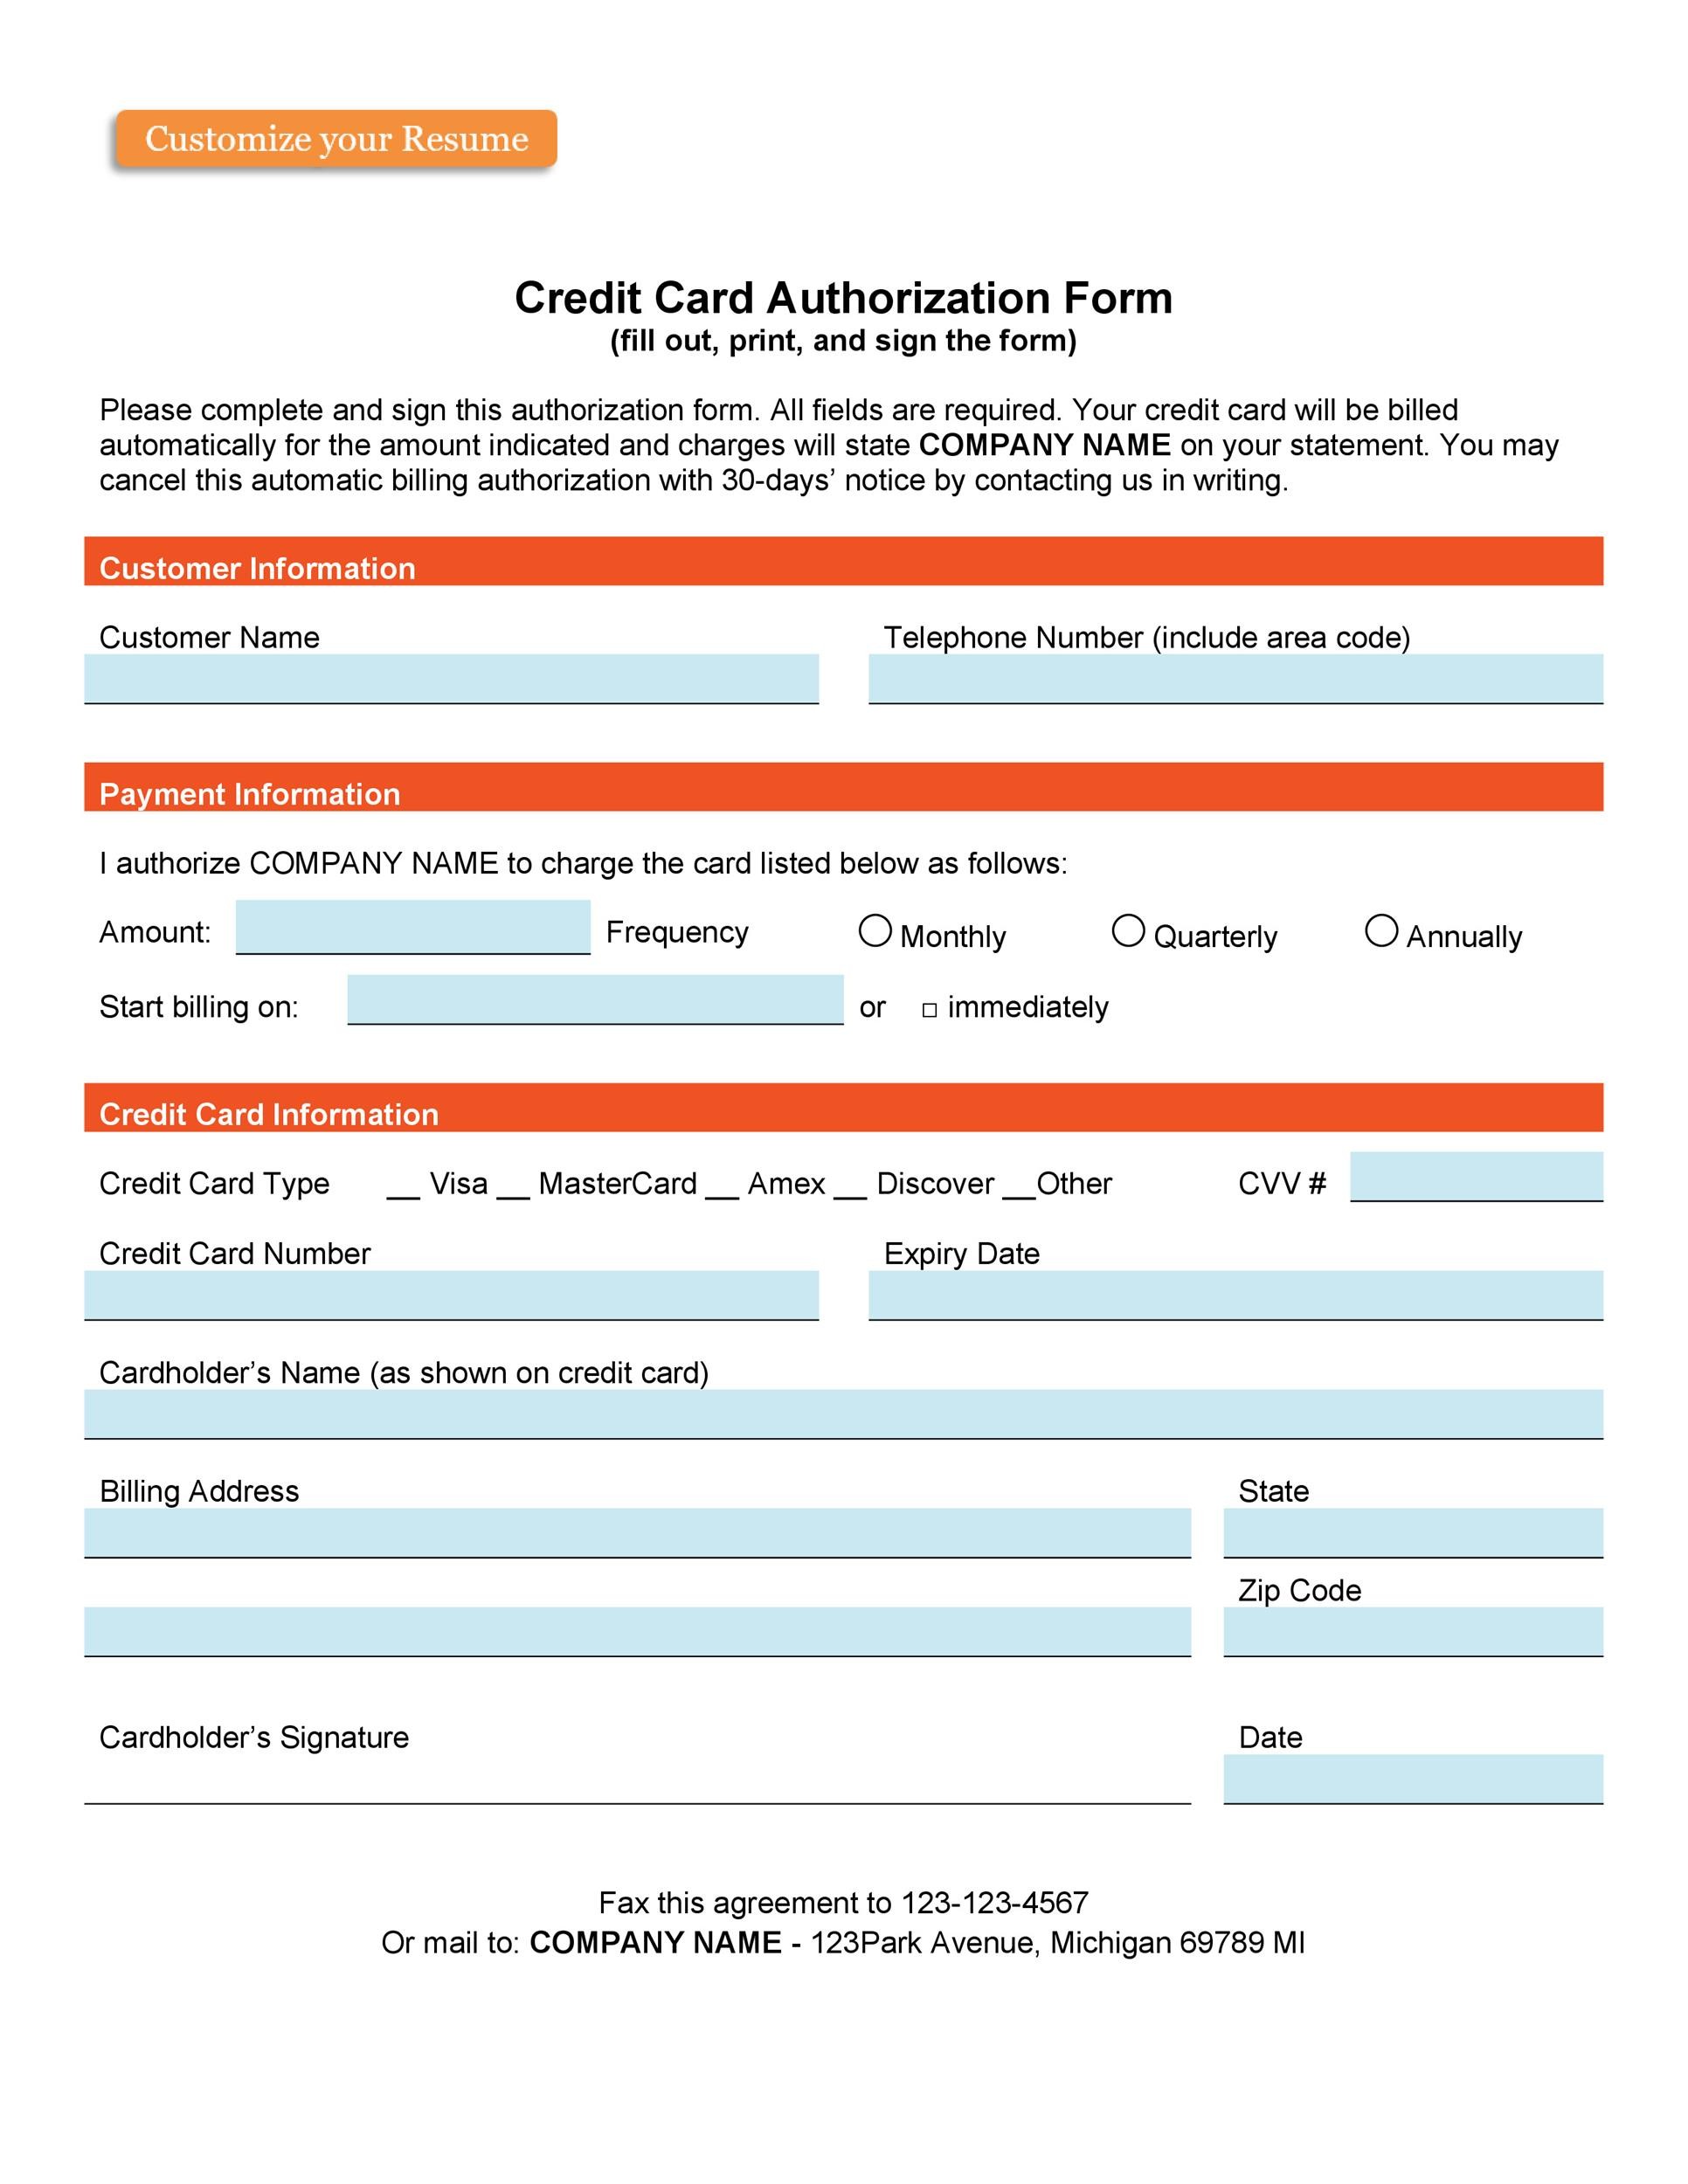 41 Credit Card Authorization Forms Templates {Ready to Use}